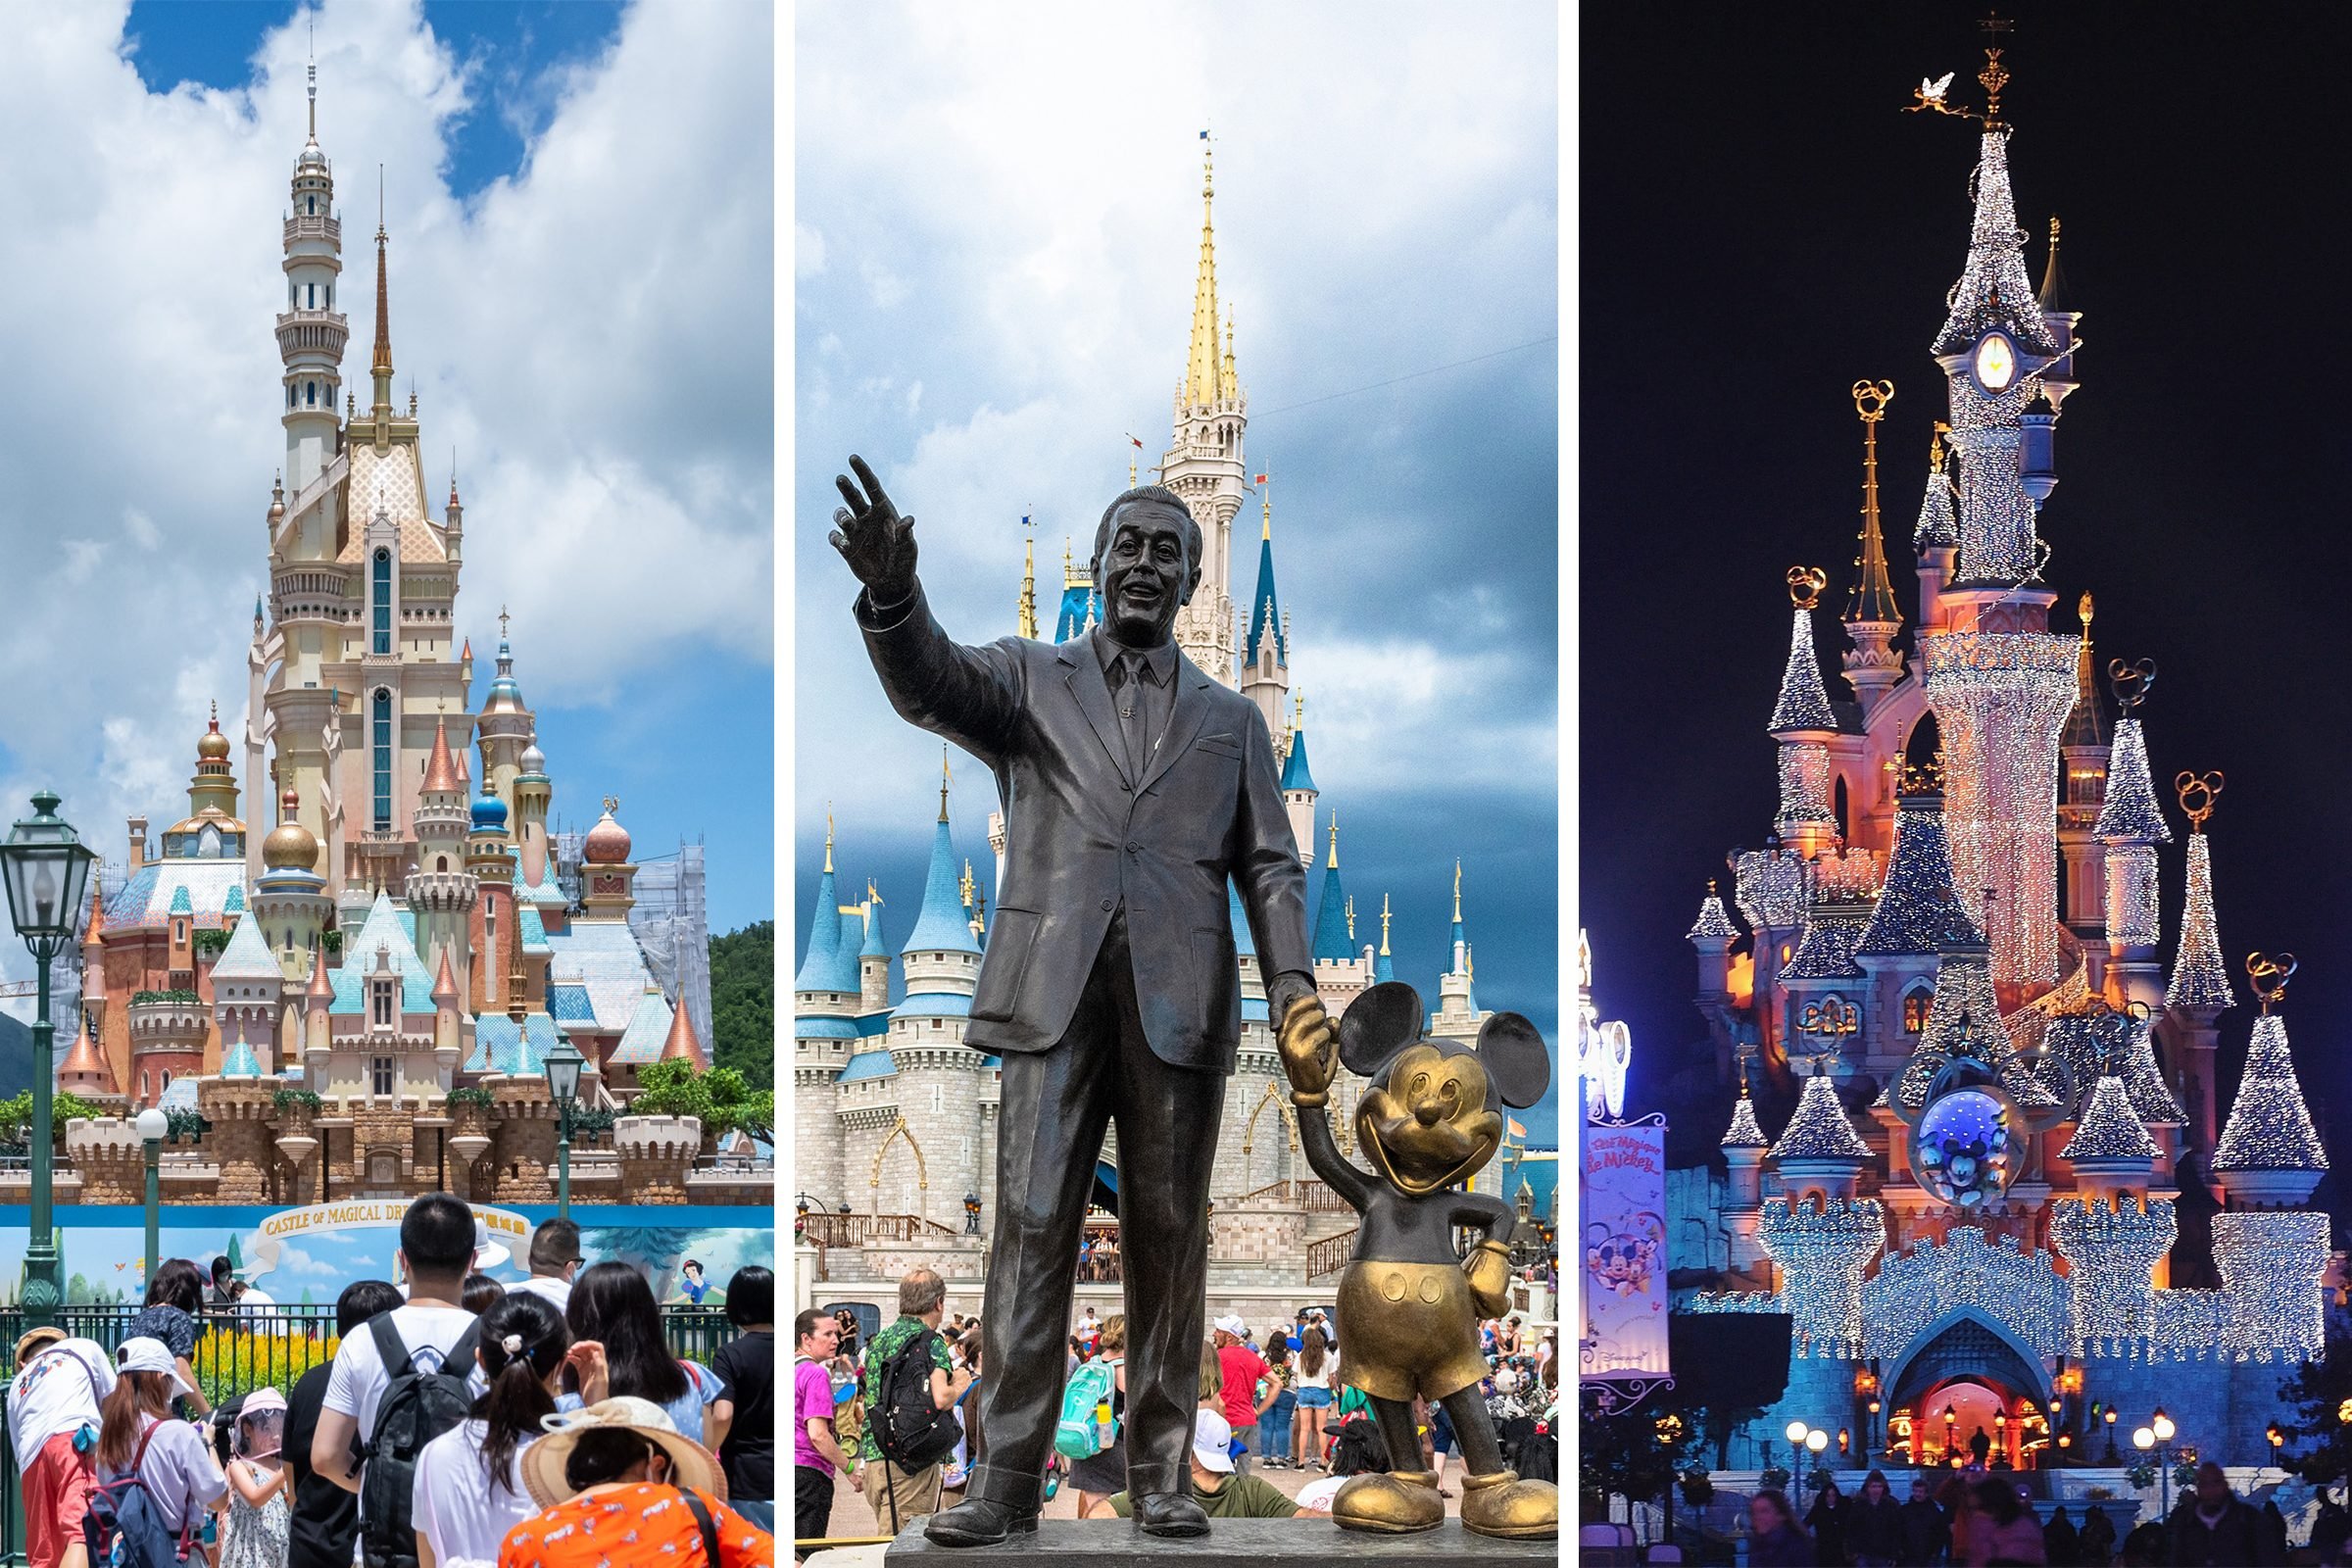 https://www.rd.com/wp-content/uploads/2021/09/three-different-disney-parks-side-by-side_gettyimages.jpg?fit=700%2C1024